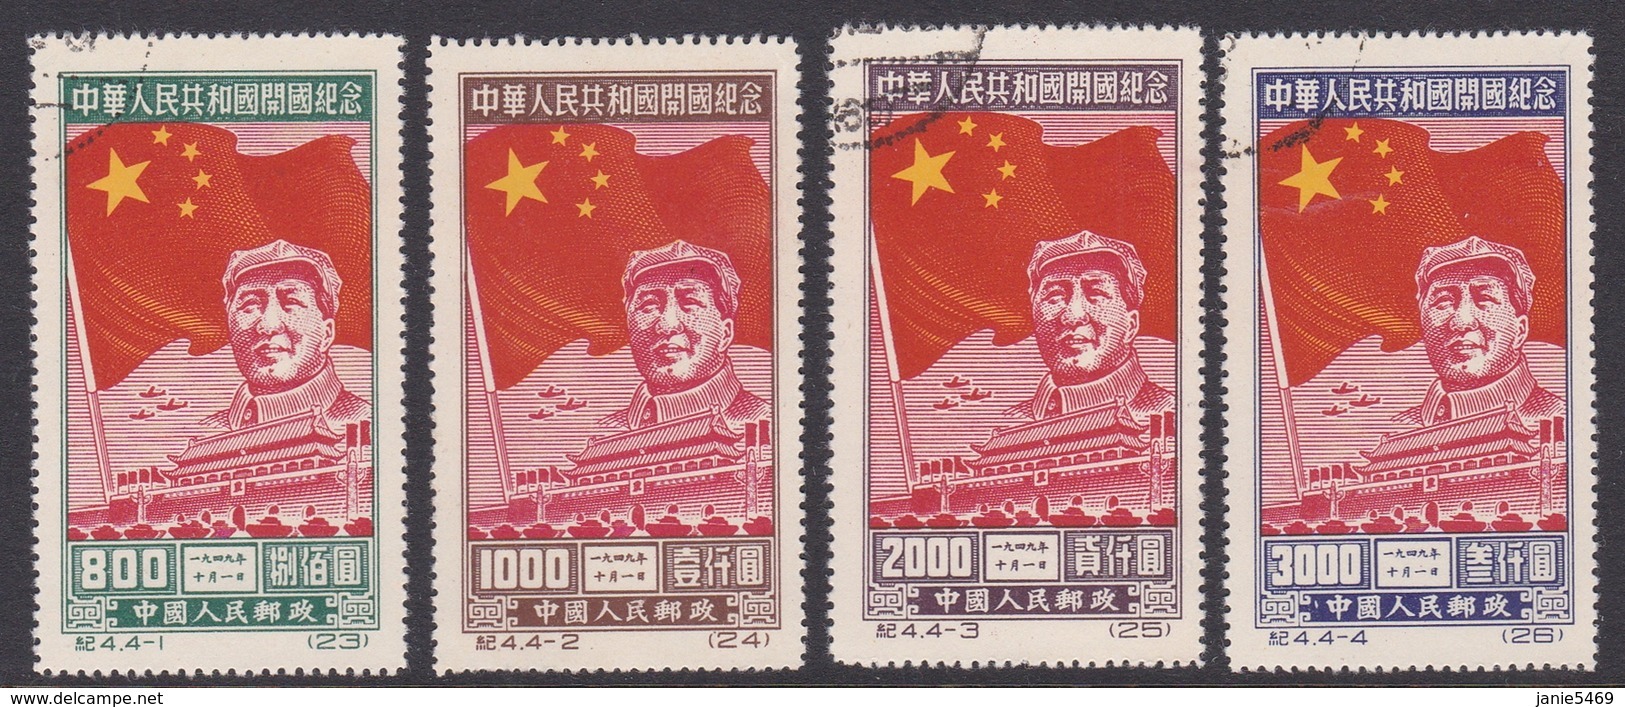 China People's Republic SG 1432-1435 1950 Mao Tse Tung, Used, Reprints - Used Stamps